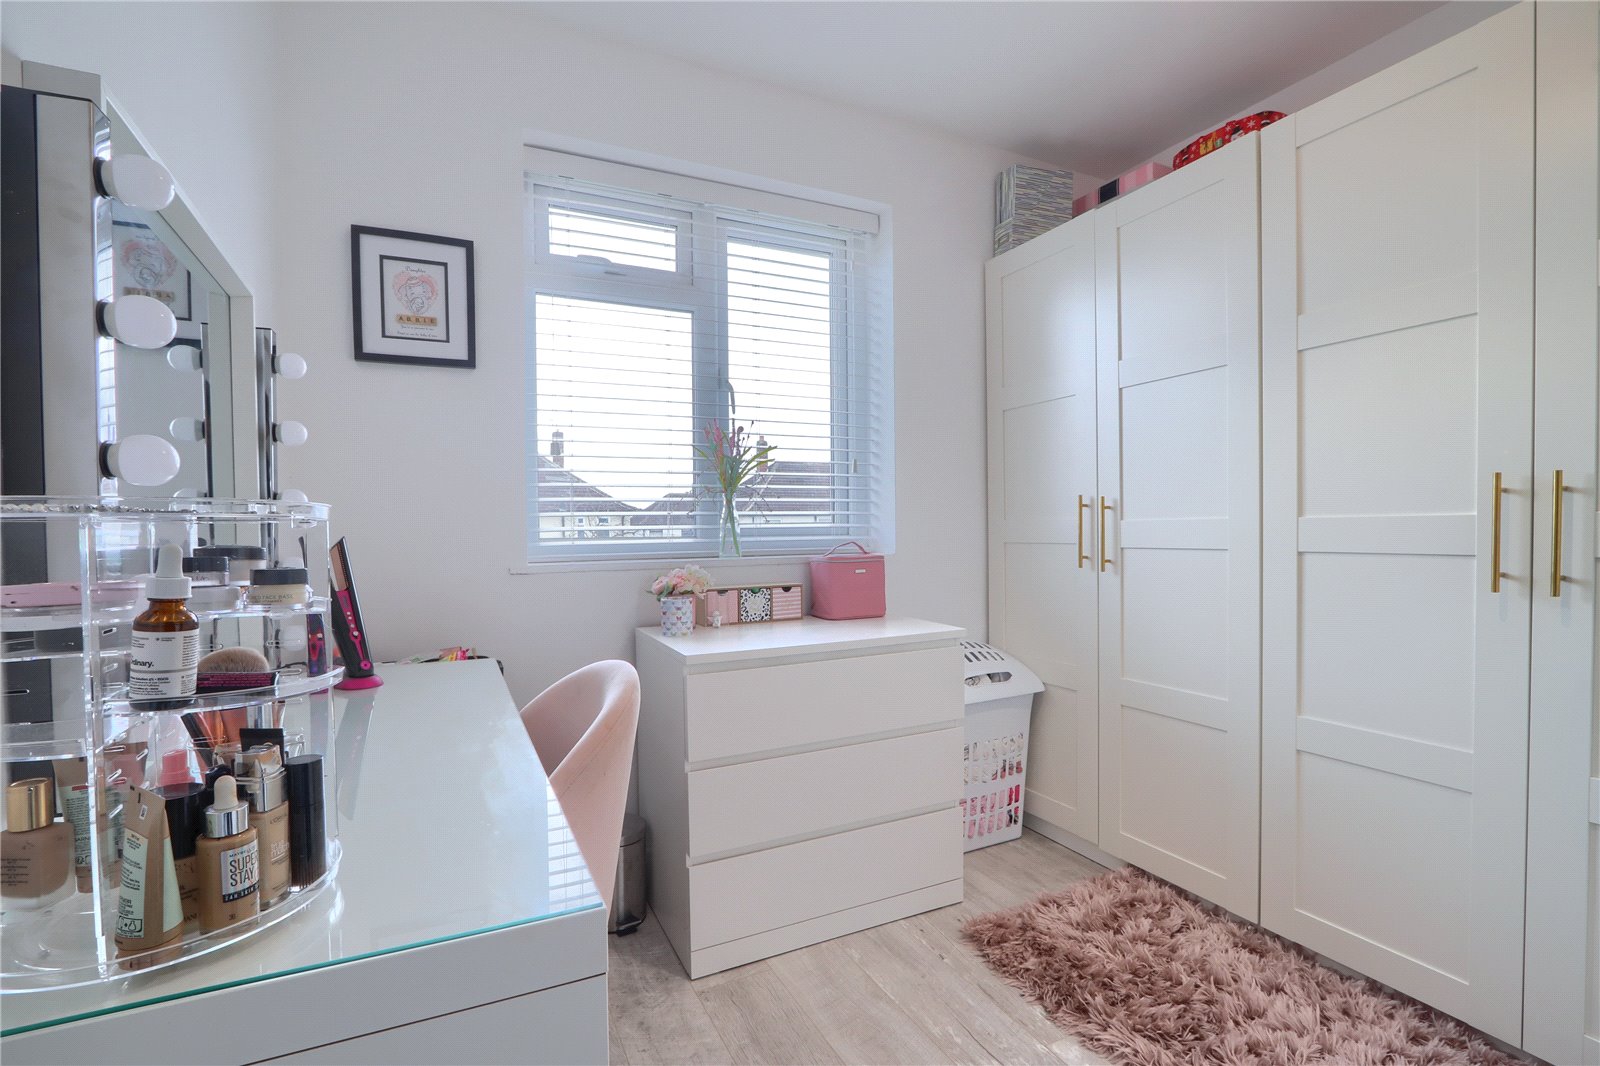 3 bed house for sale in Lingdale Close, Stockton-on-Tees  - Property Image 9